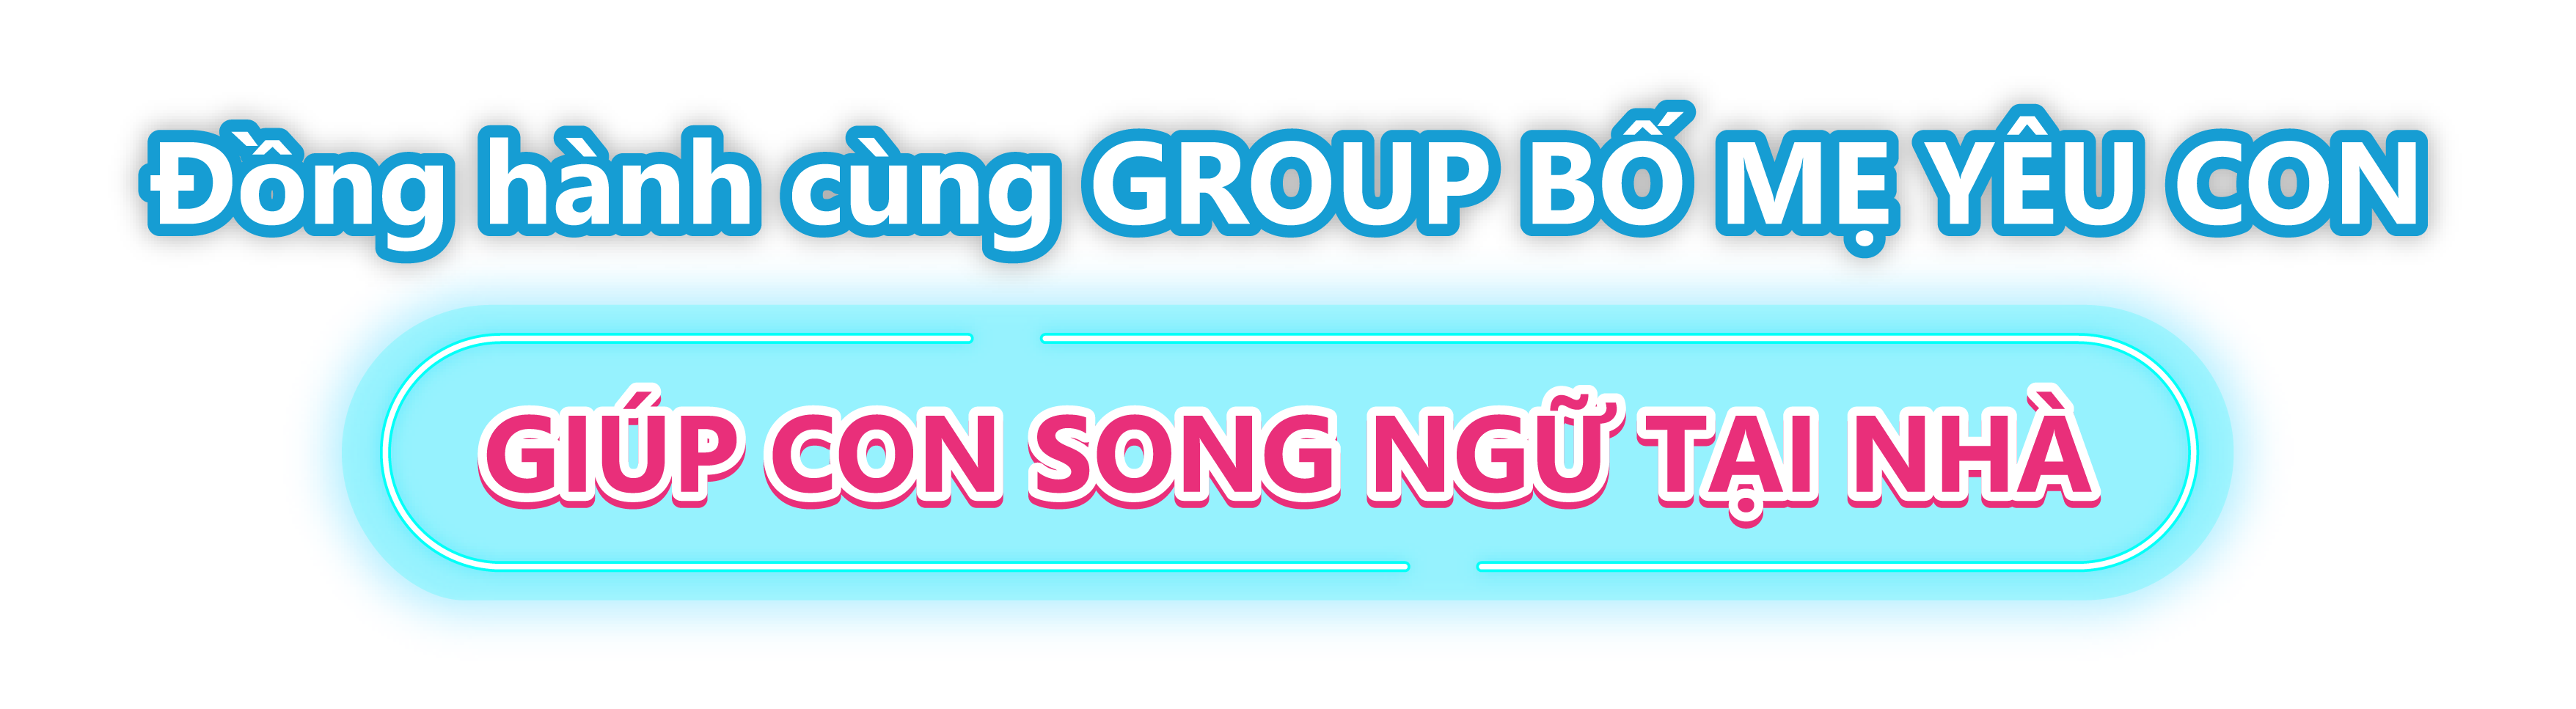 dong hanh cung group BMYC 01